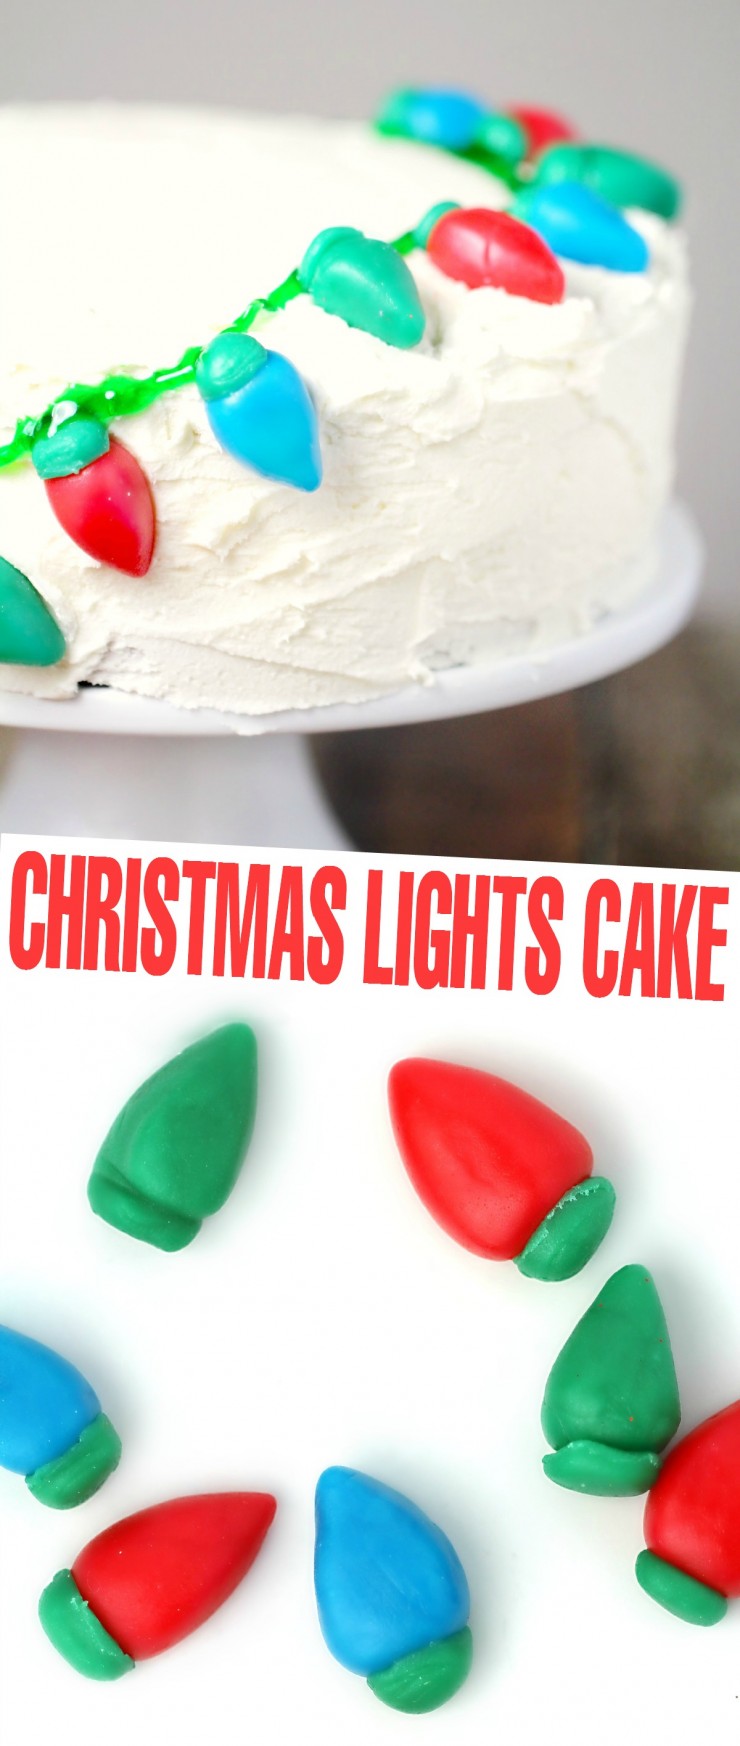 Christmas Cake Tutorial: Christmas Lights Cake - this is an easy dessert recipe that uses Airheads instead of fondant!